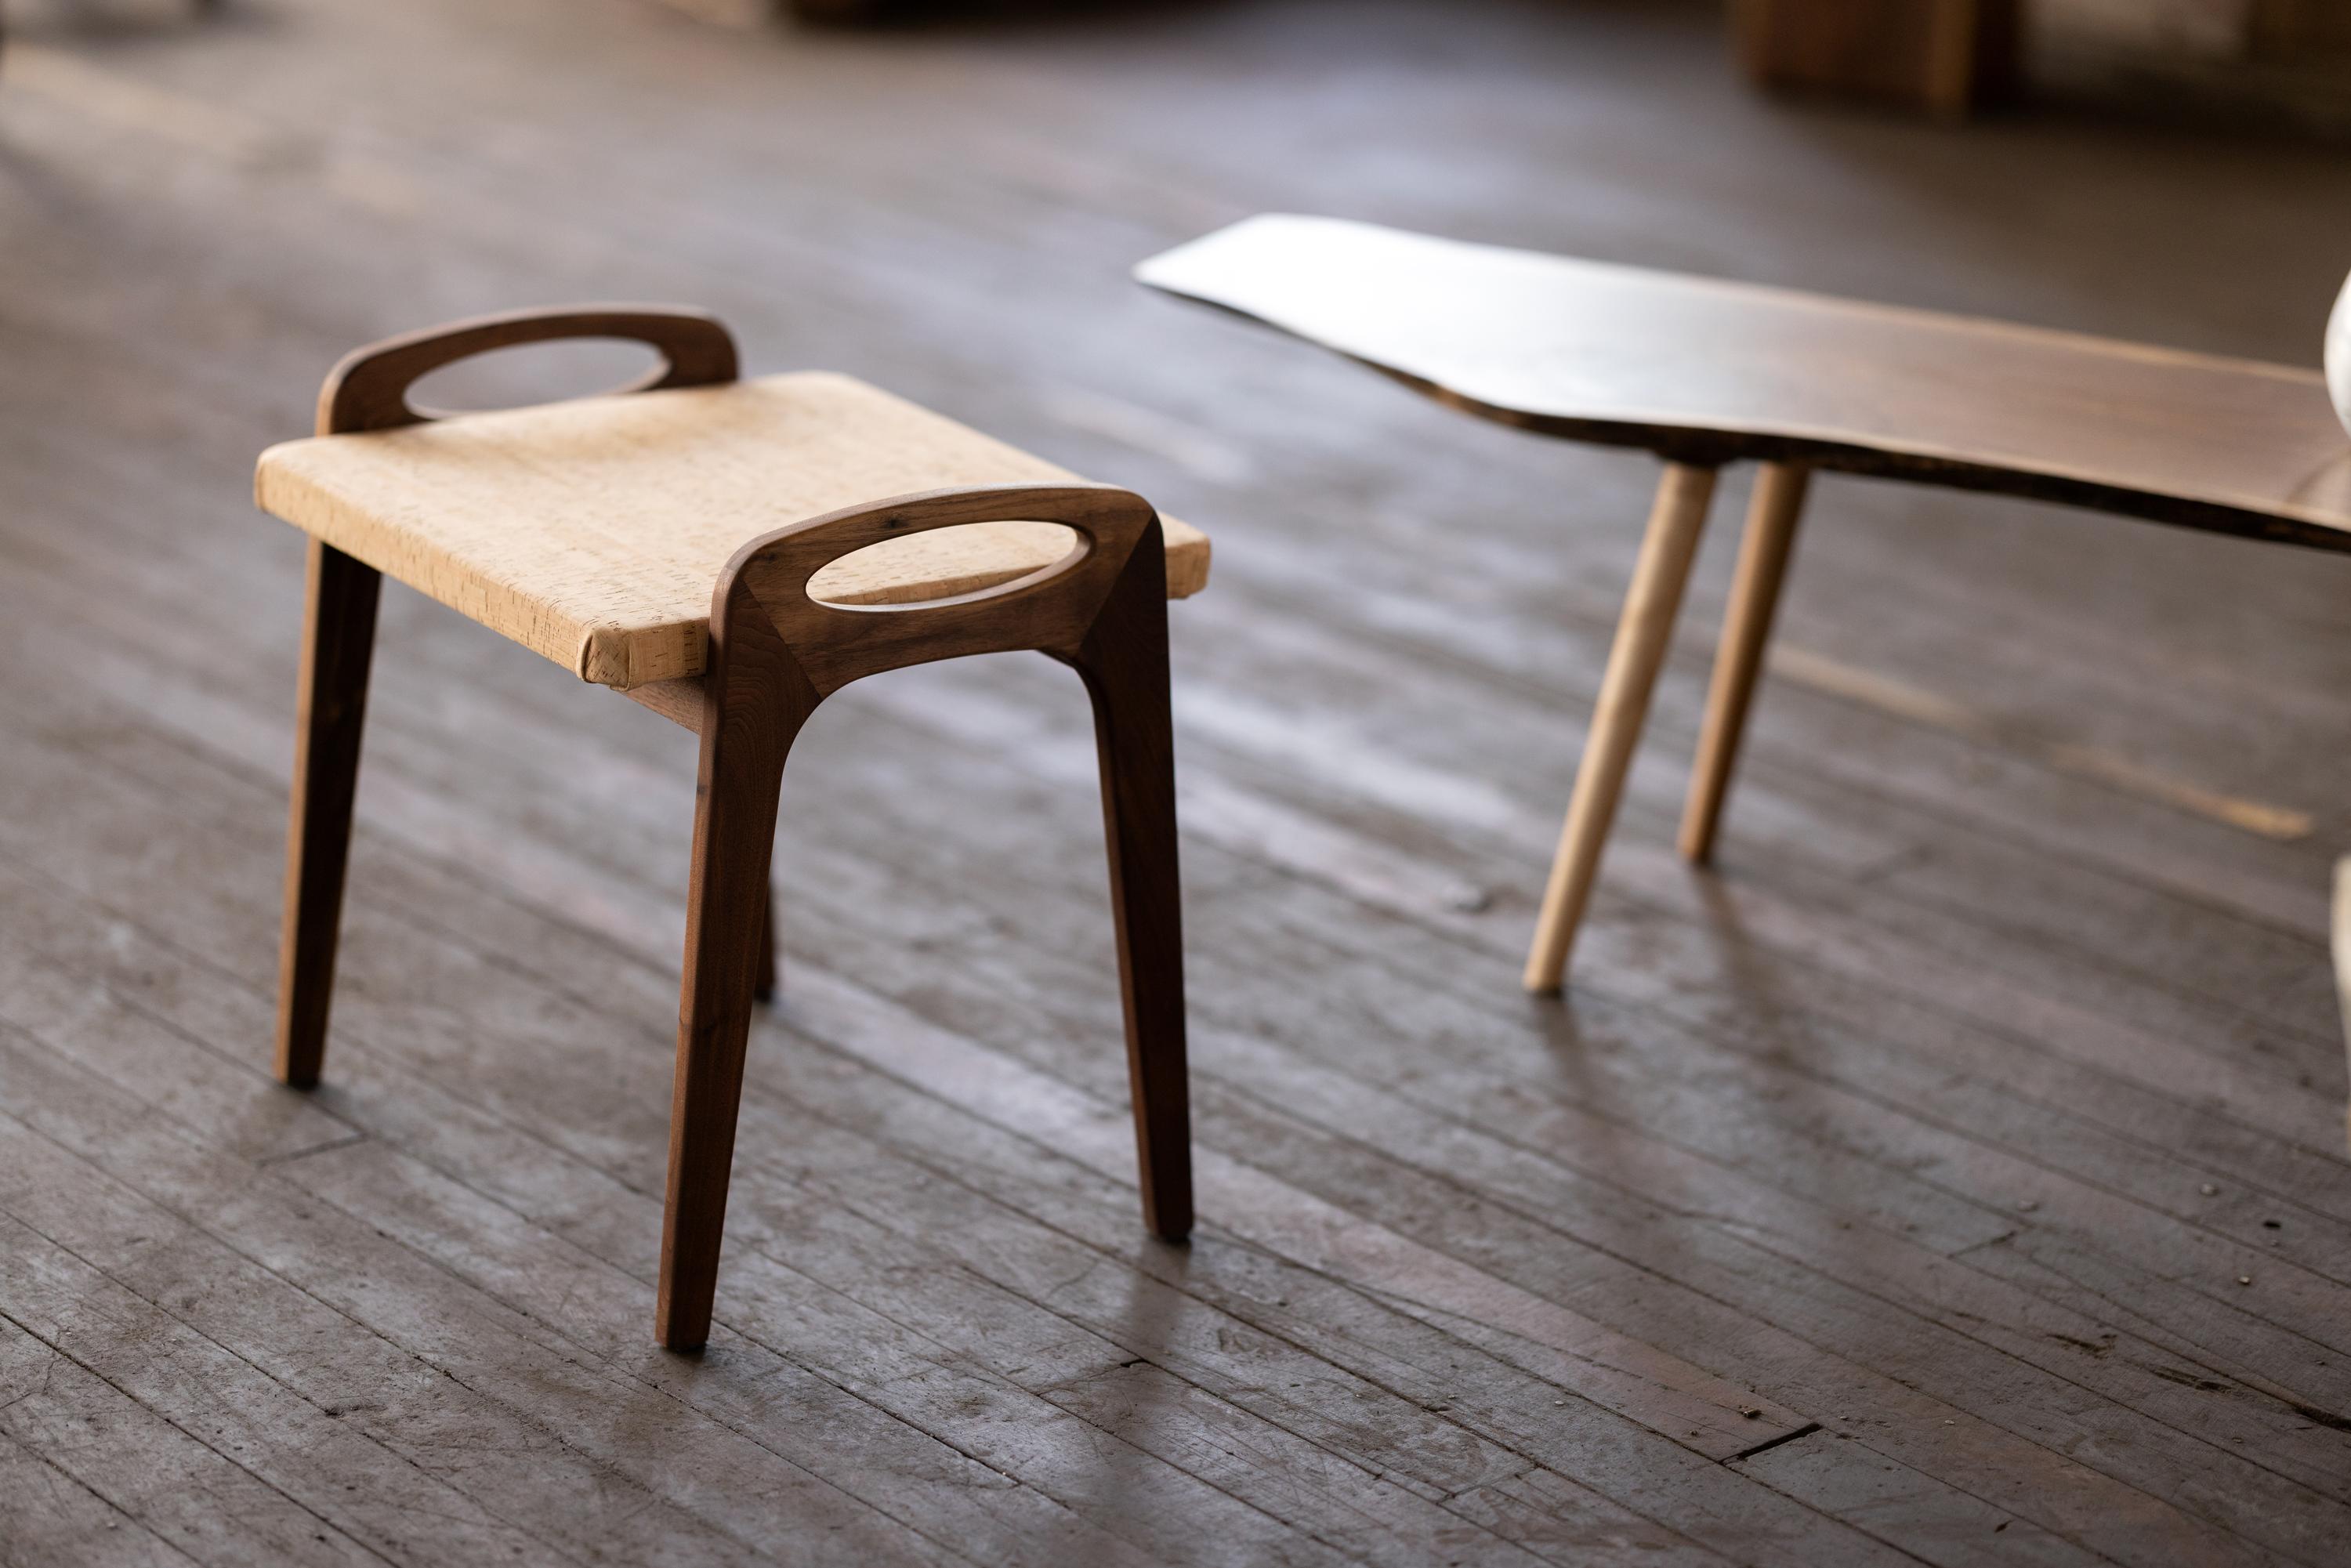 Organic forms and natural materials play a duet in this Mid-Century Modern inspired Suber stool. Upholstered in cork and shown here in walnut, our Suber stool can be used as additional seating in living rooms, bedrooms, or dining areas. The Suber